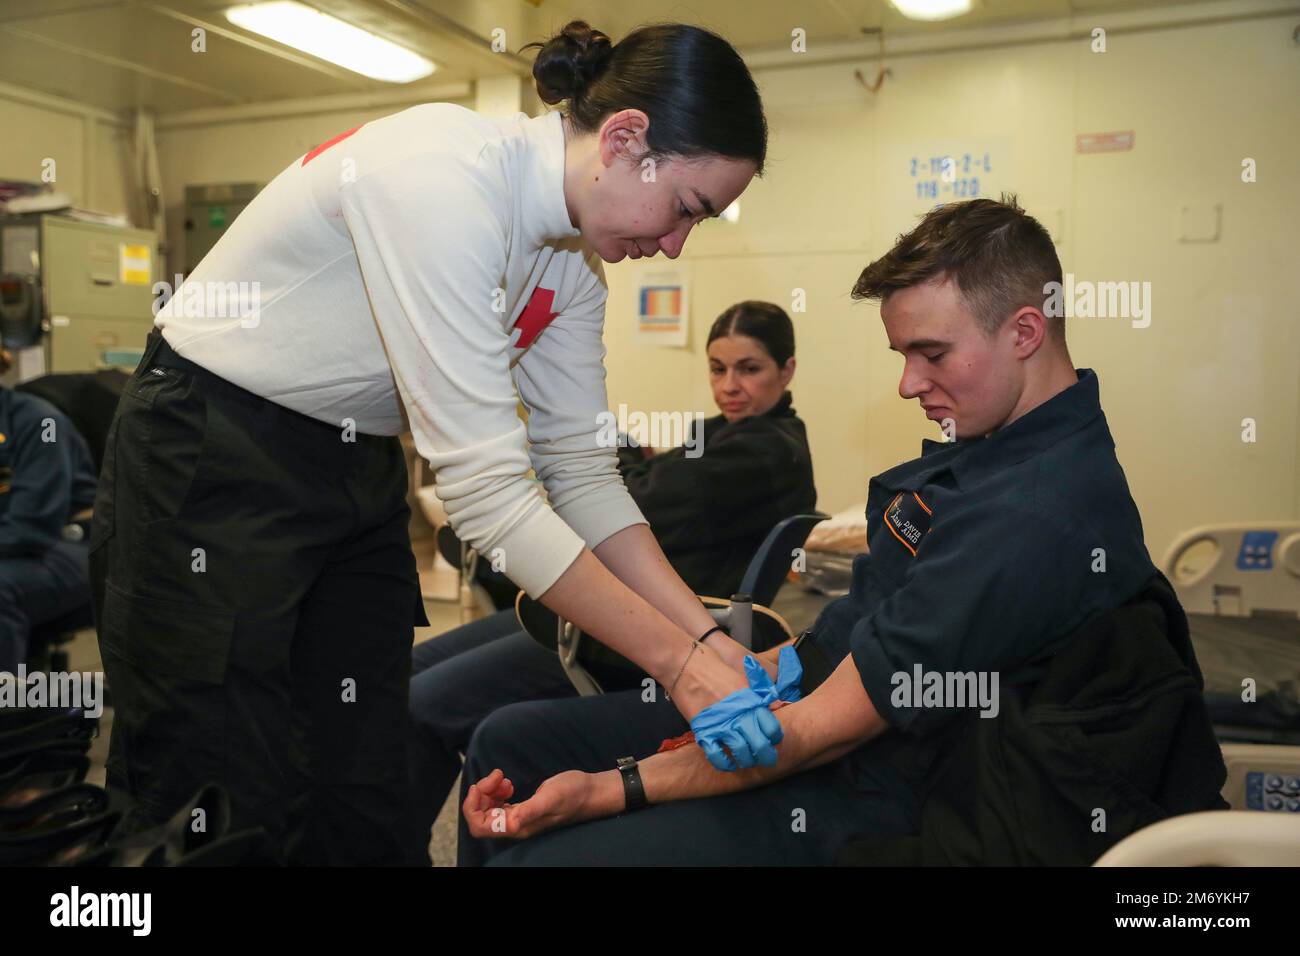 Hospitalman Sarah Chinquee, left, from Browns Mills, New Jersey, assigned to USS Gerald R. Ford’s (CVN 78) medical department, places a simulated laceration wound on Aviation Machinist's Mate Airman Joseph Davis, from Asheville, North Carolina, assigned to Ford’s aircraft intermediate maintenance department, prior to a general quarters drill, April 20, 2022. Ford is underway in the Atlantic Ocean conducting carrier qualifications and strike group integration prior to operational deployment. Stock Photo